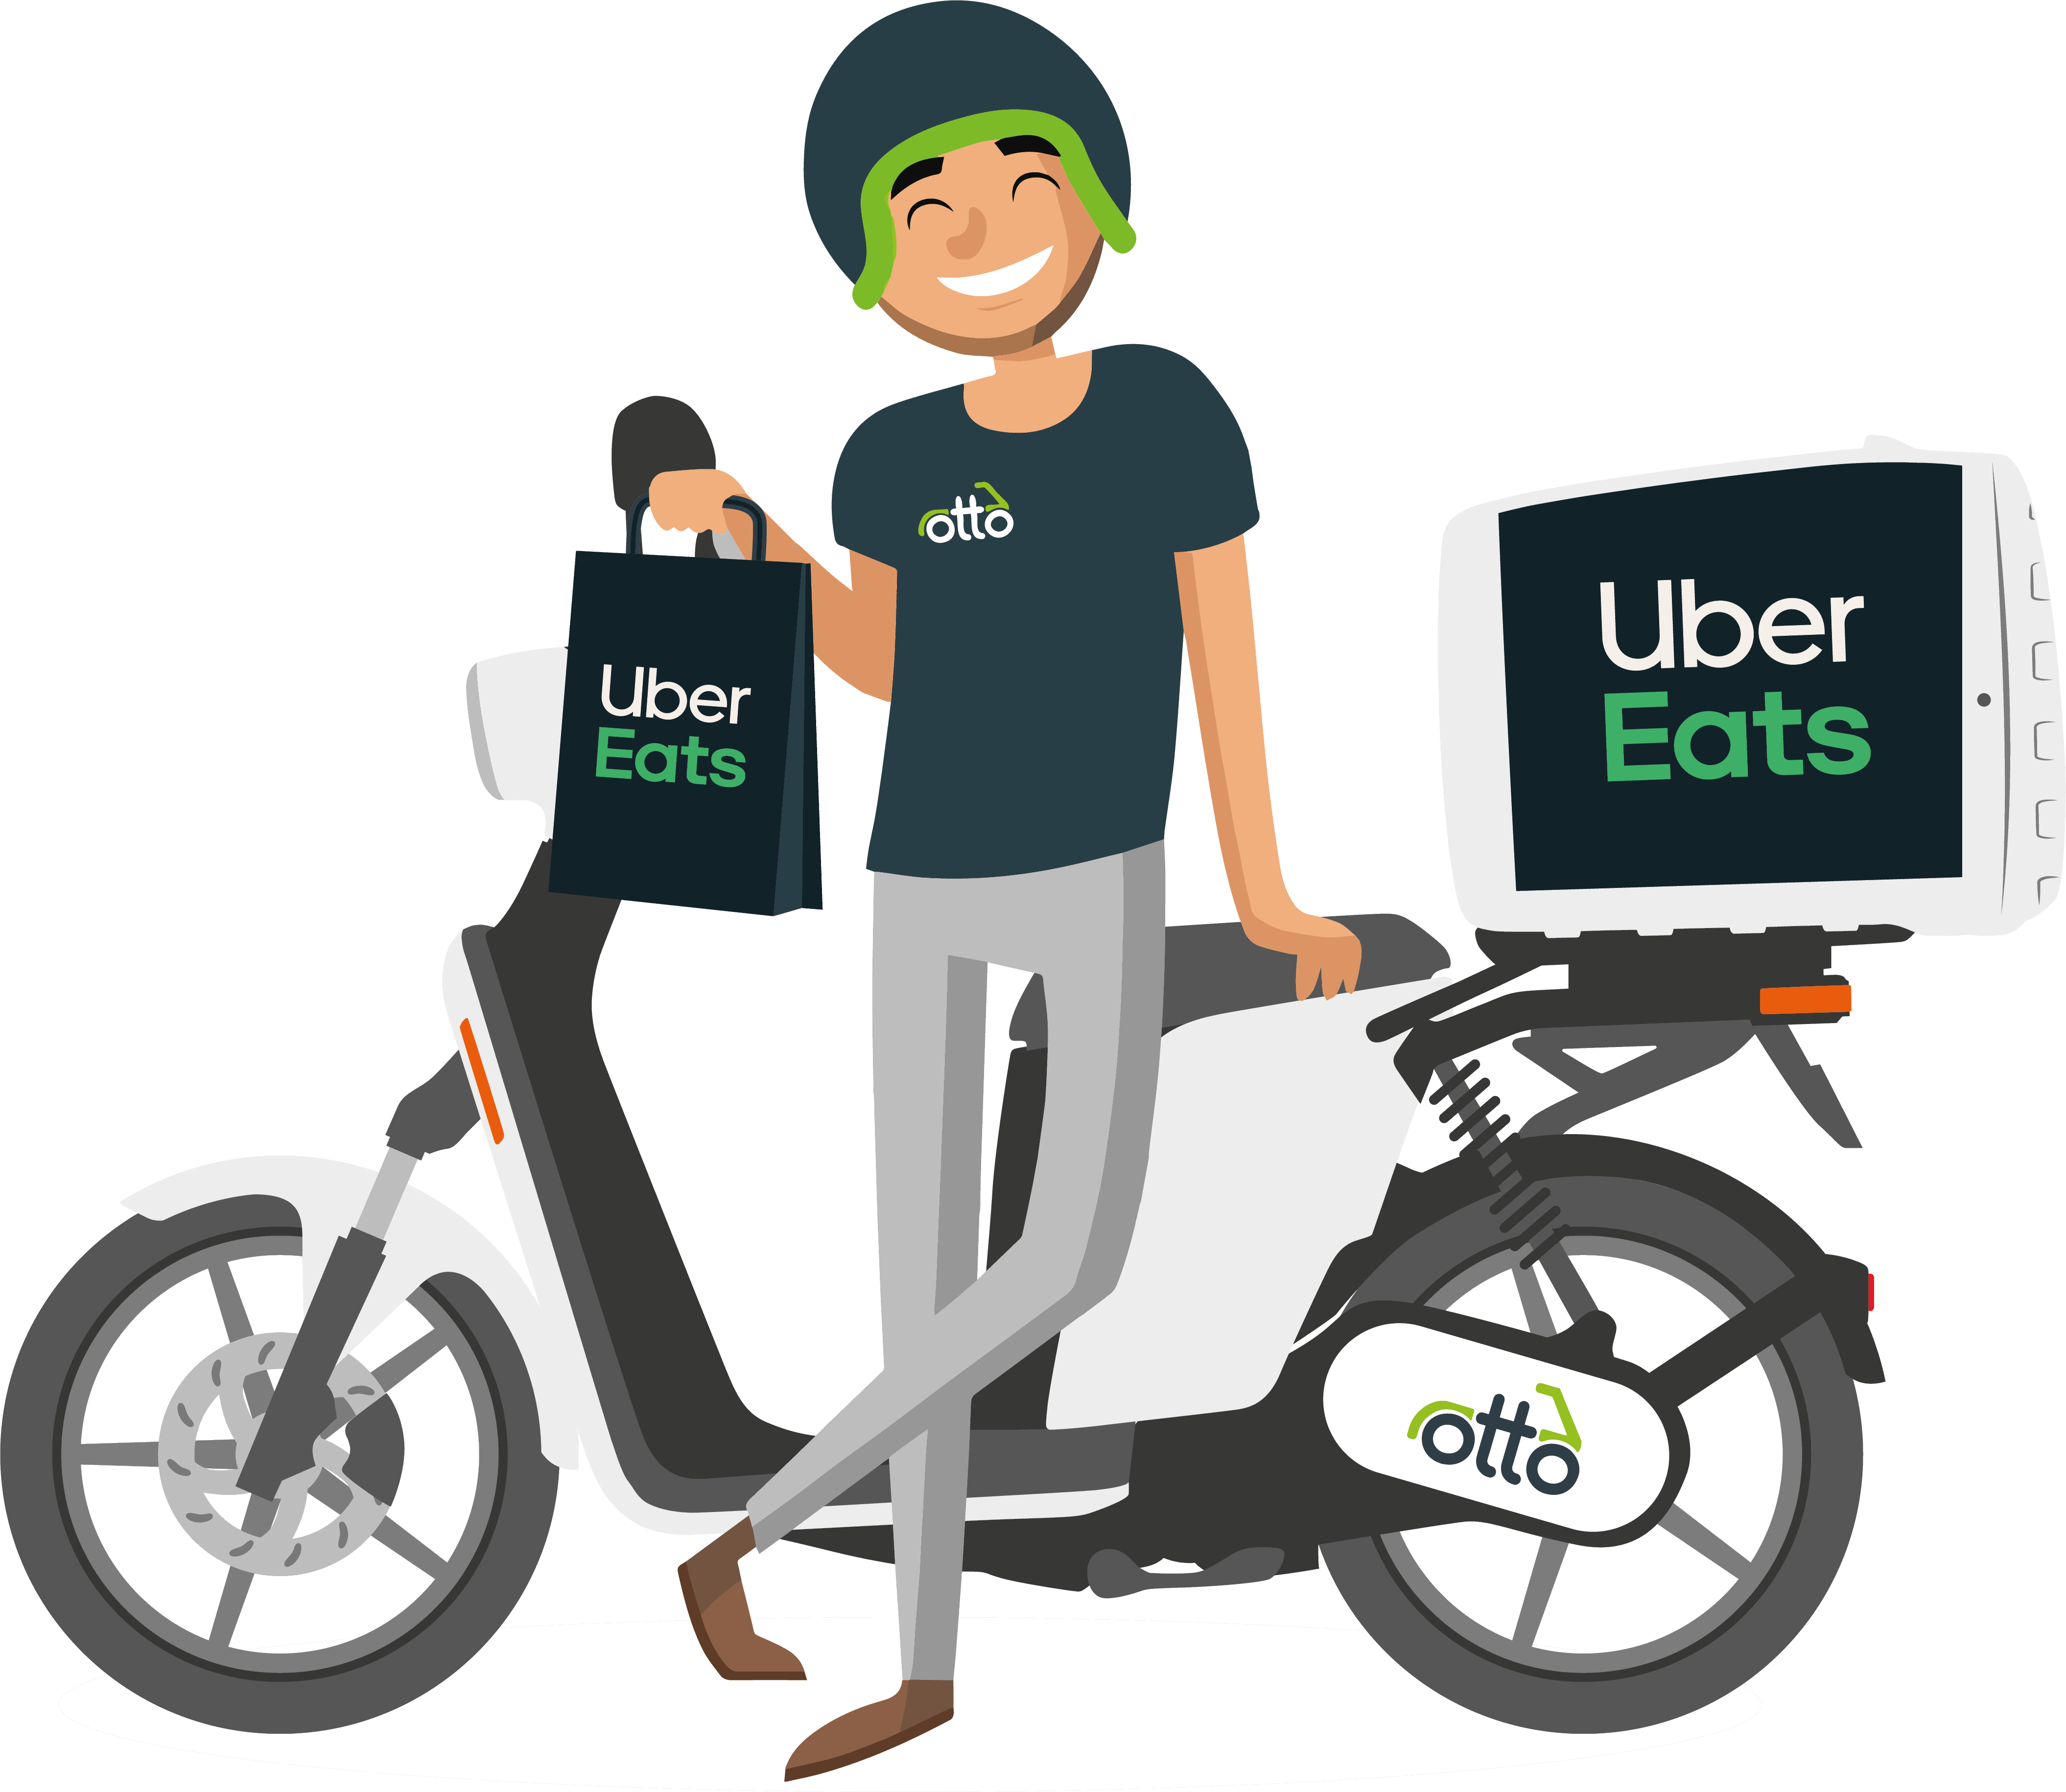 Askoll Driver for Uber Eats illustration standing next to his Askoll e-moped